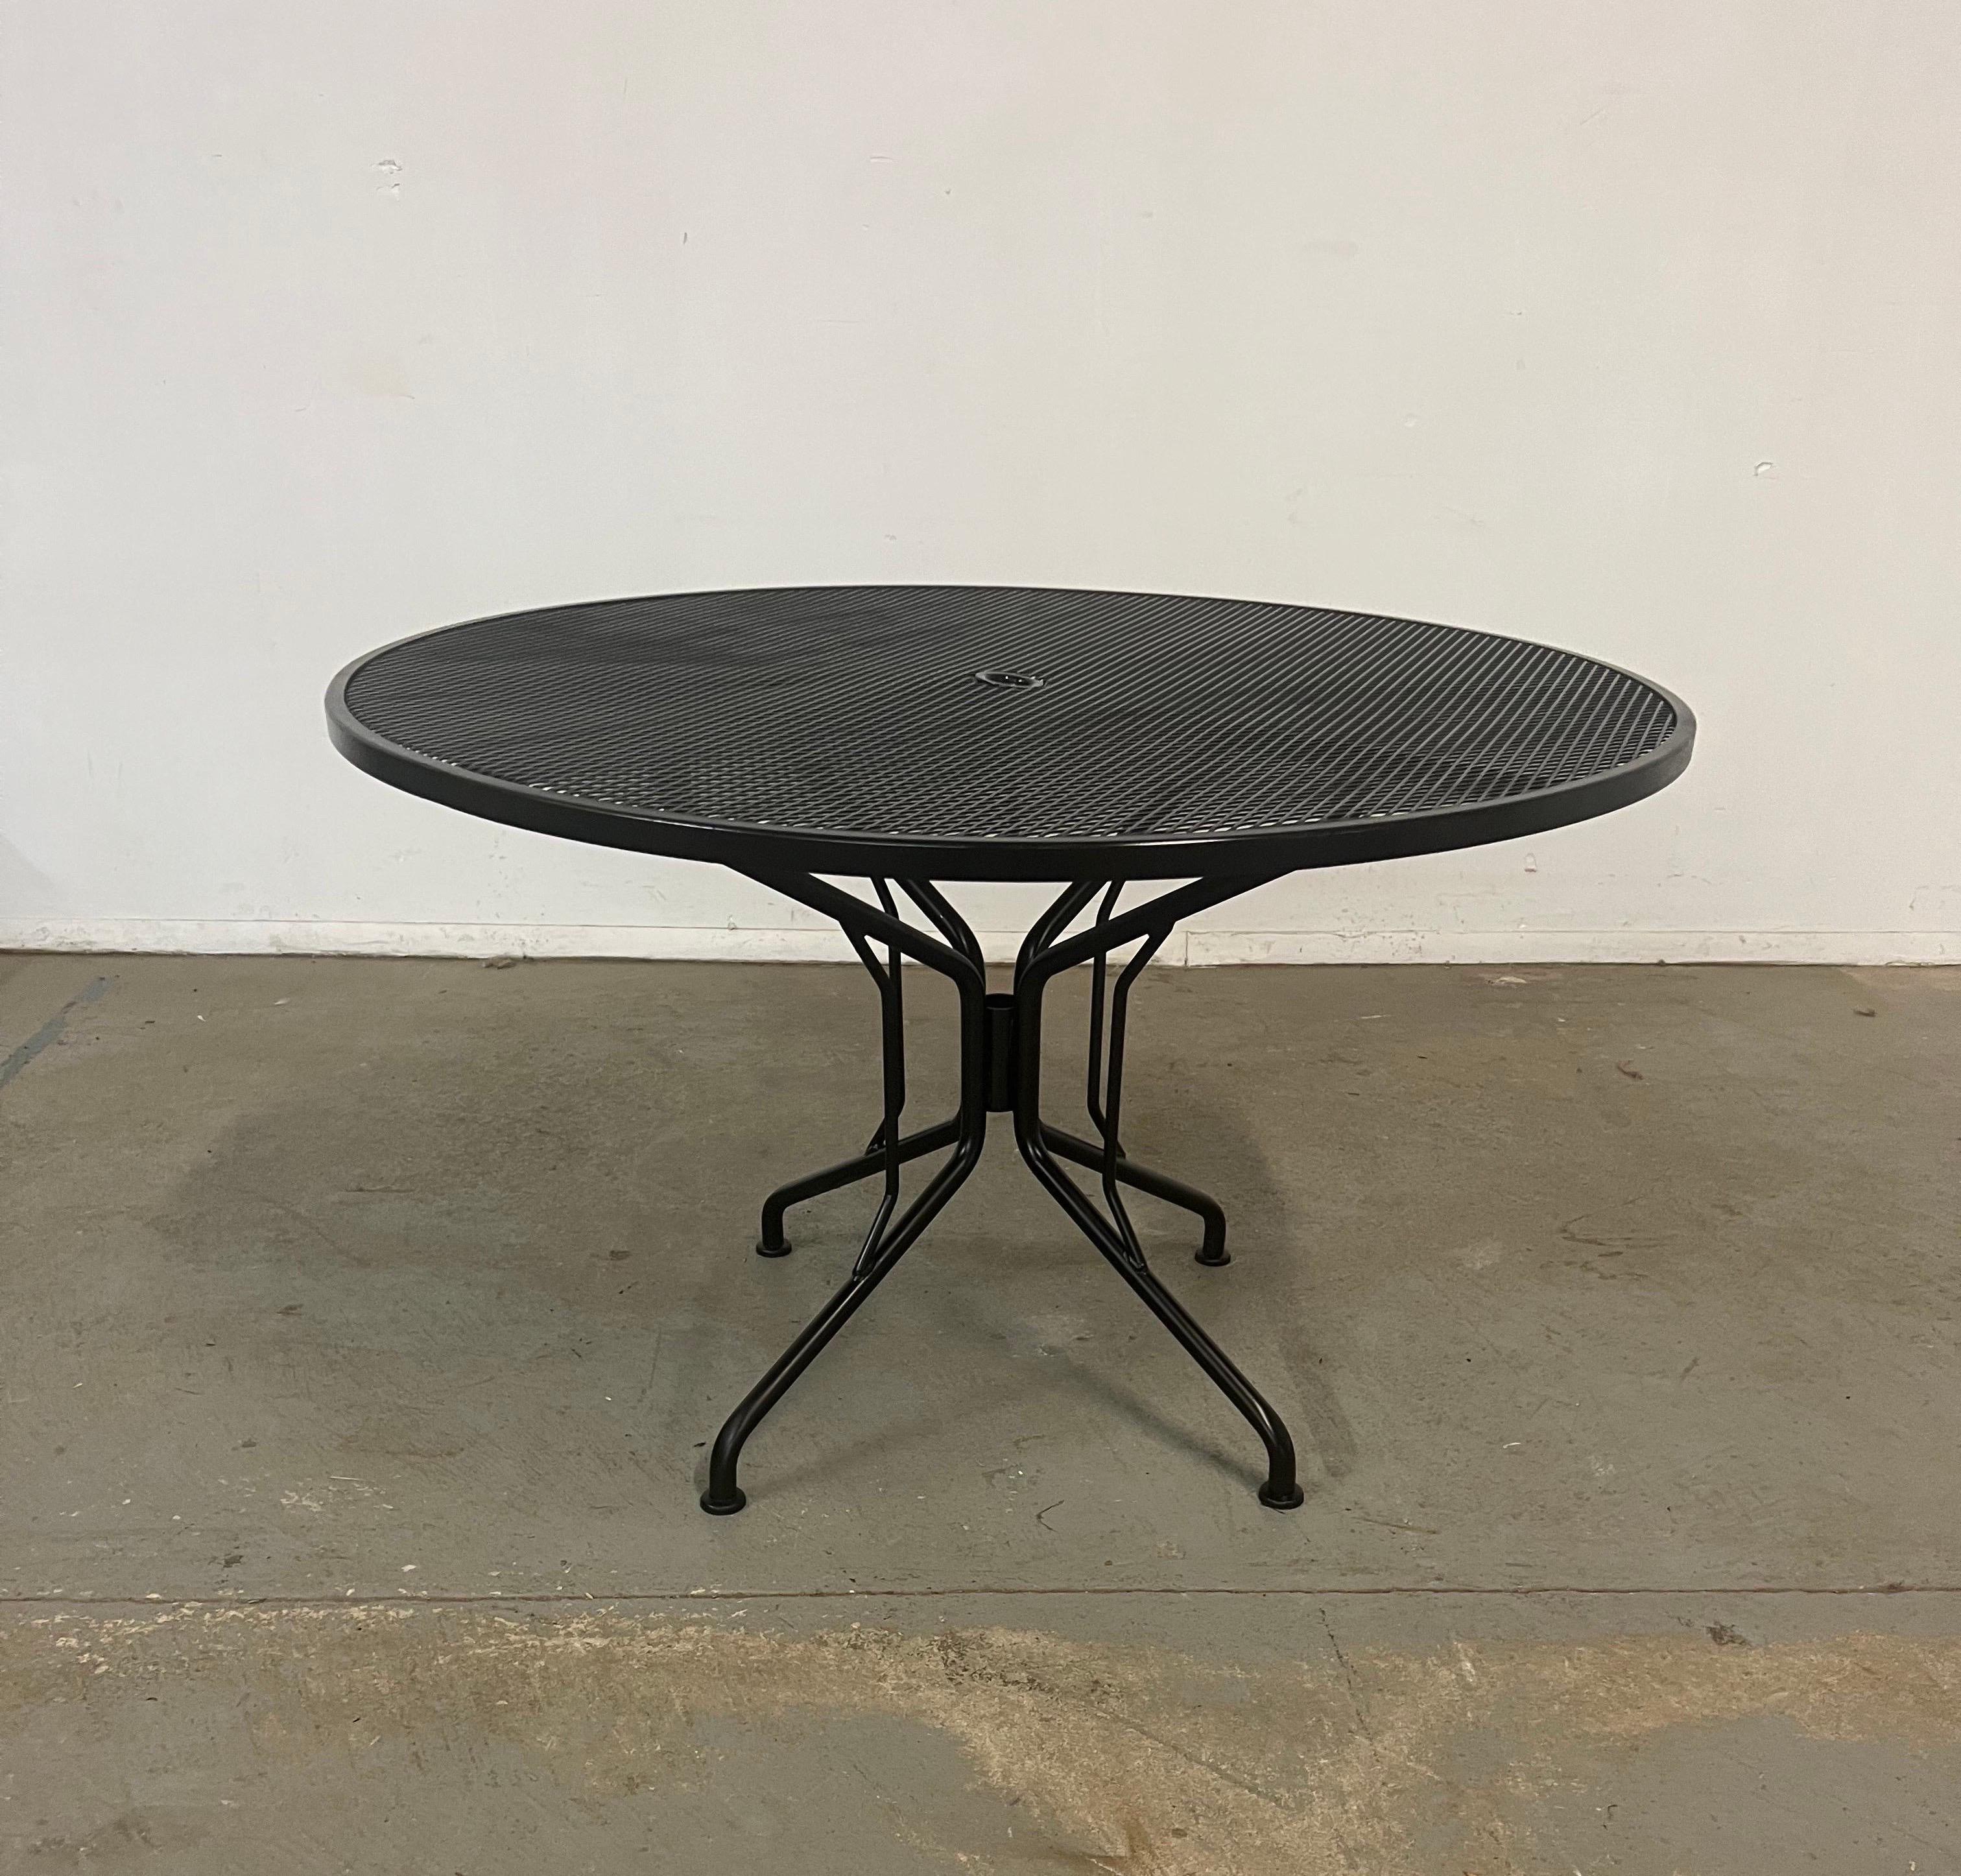 Mid-century outdoor iron woodard round dining table 
Offered is a mid-century outdoor iron woodard round dining table. Features black paint and woven wrought iron. The table is structurally sound in good condition and can accommodate up to 4 seats.